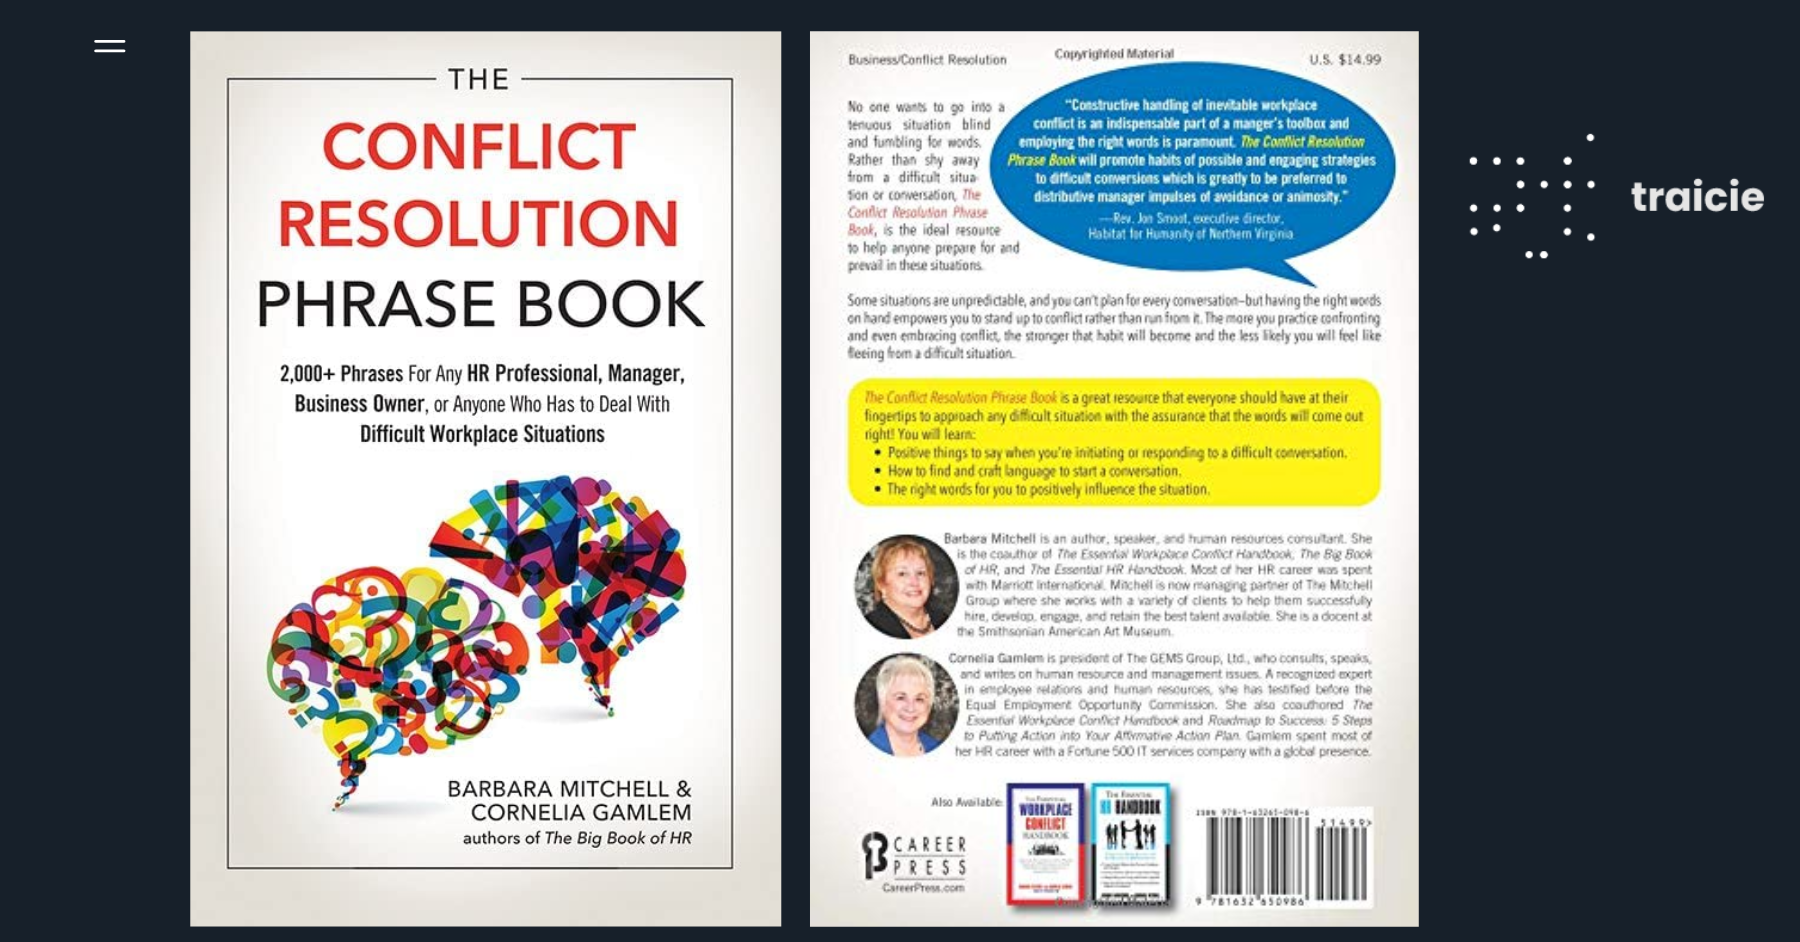 Review The Conflict Resolution Phrase Book by by Barbara Mitchell (2)